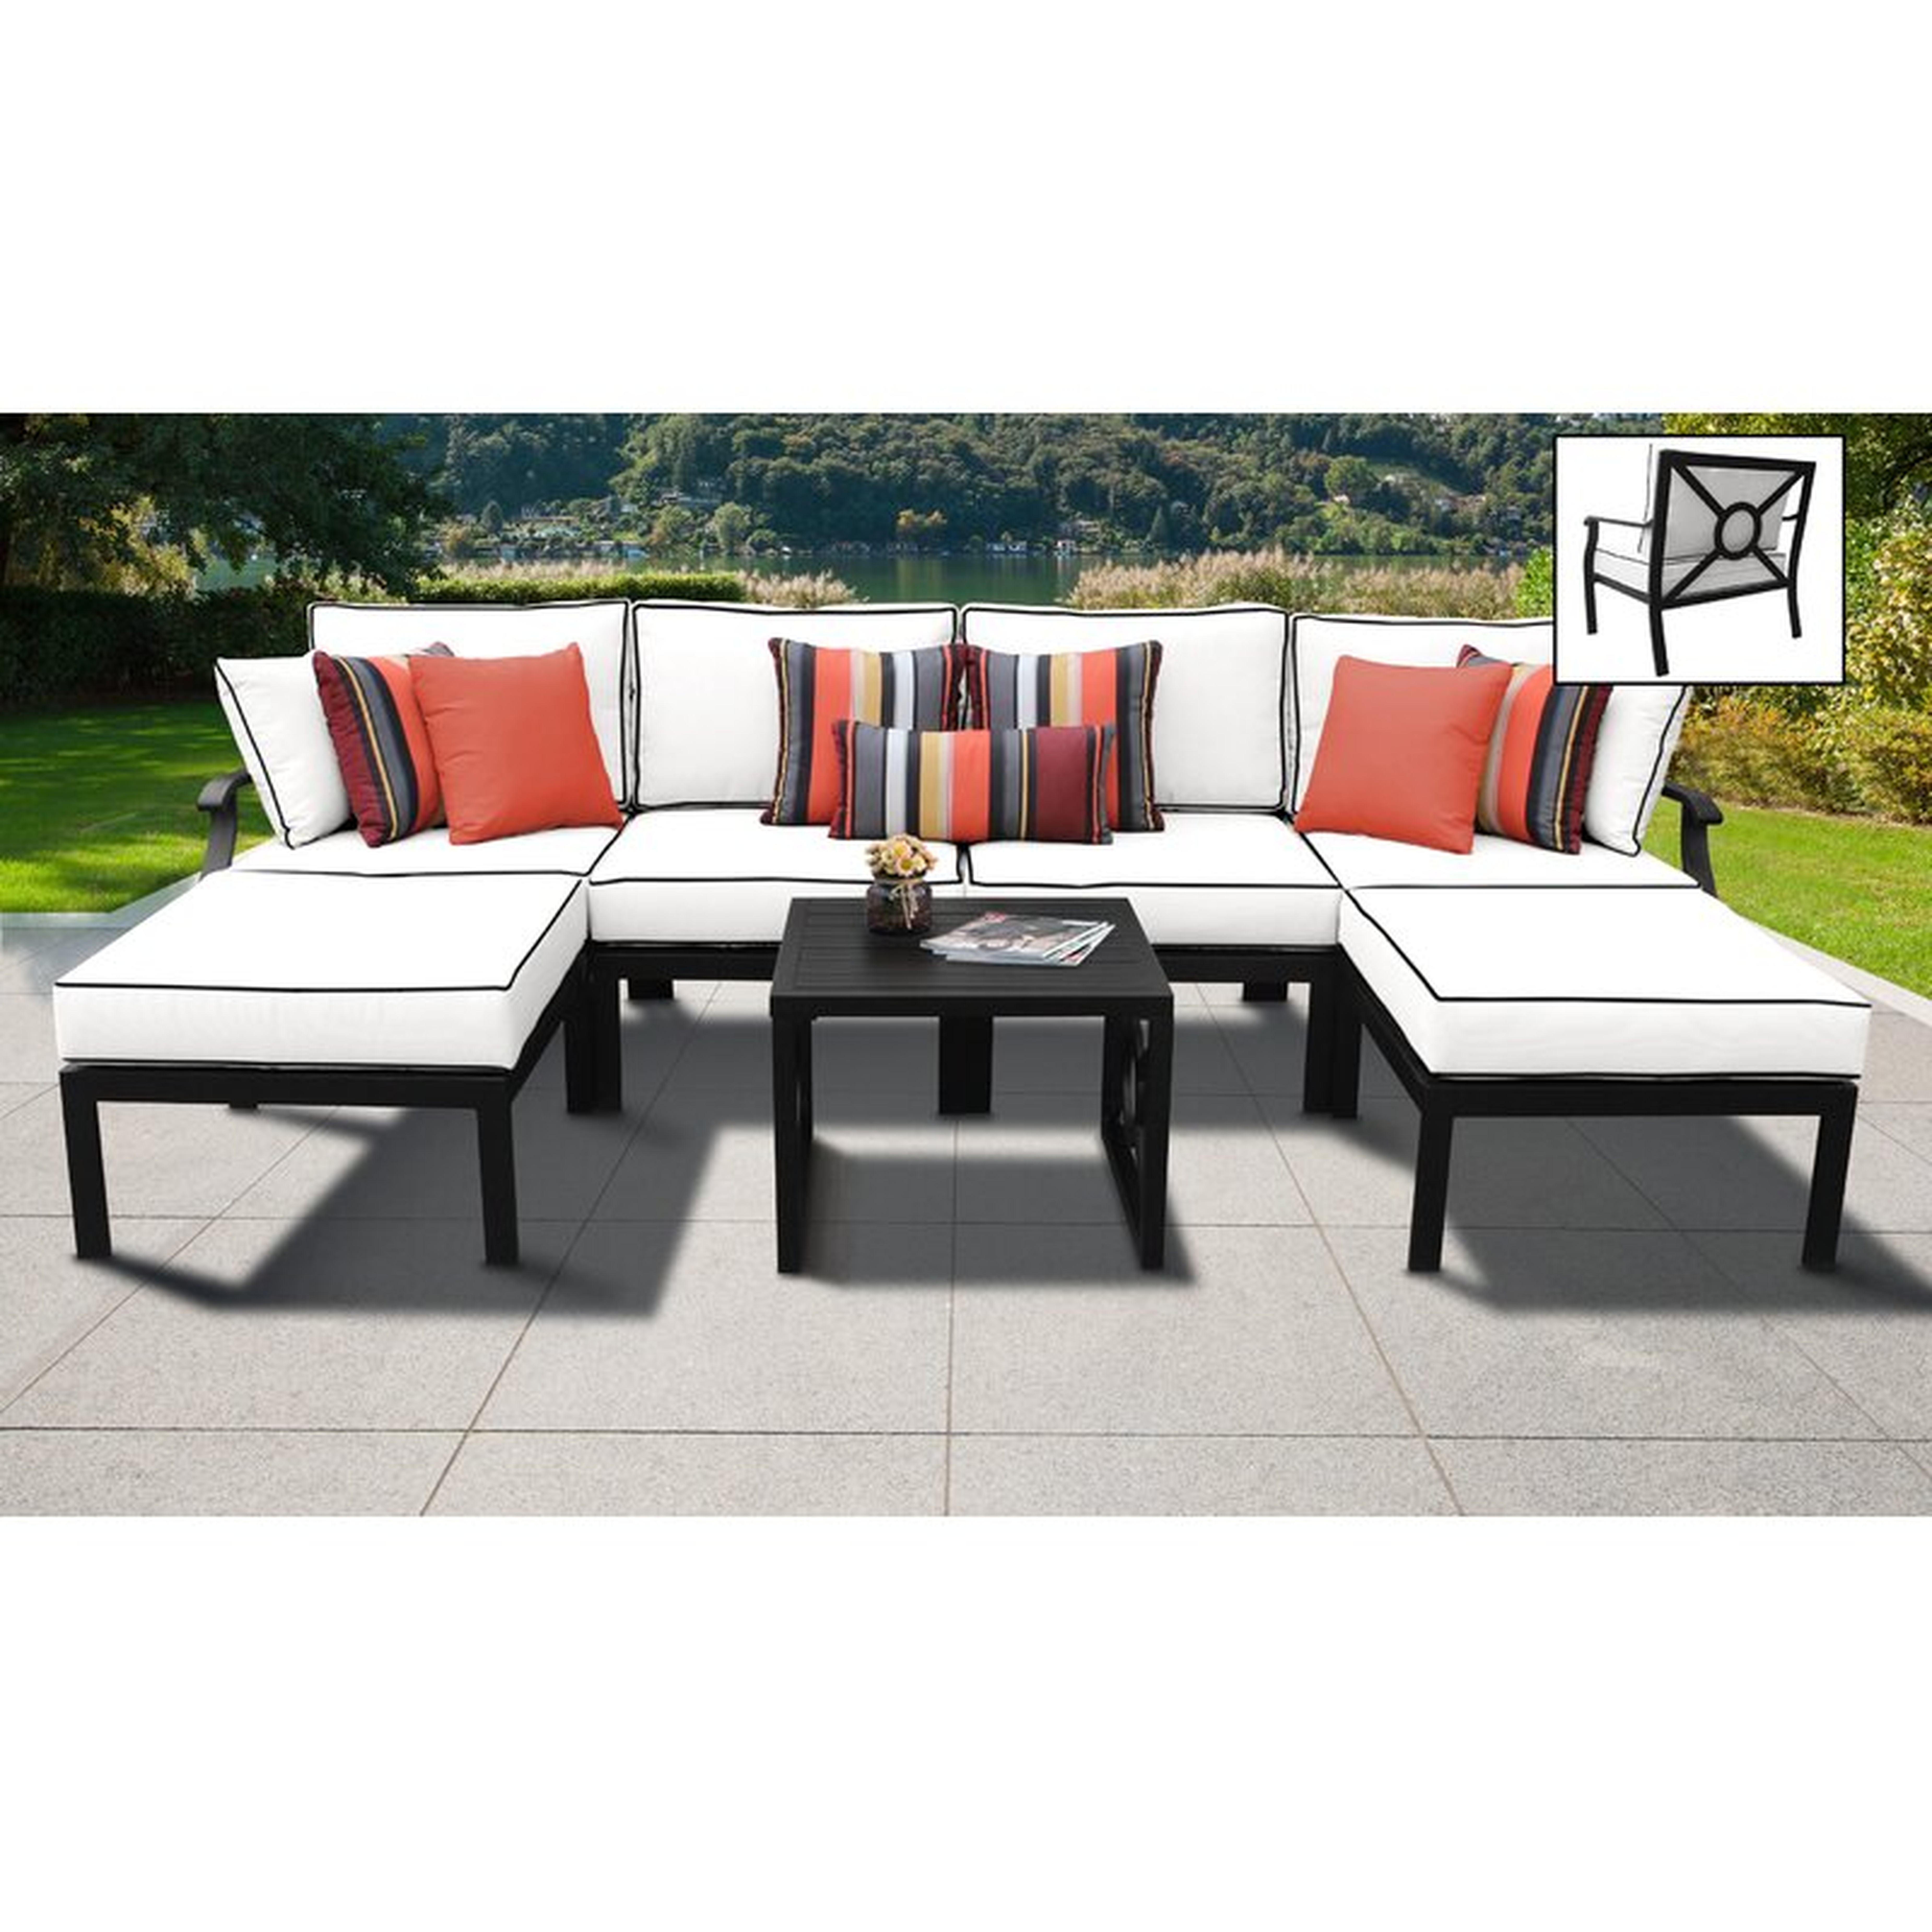 kathy ireland Madison Ave. 7 Piece Sectional Seating Group with Cushions - Wayfair